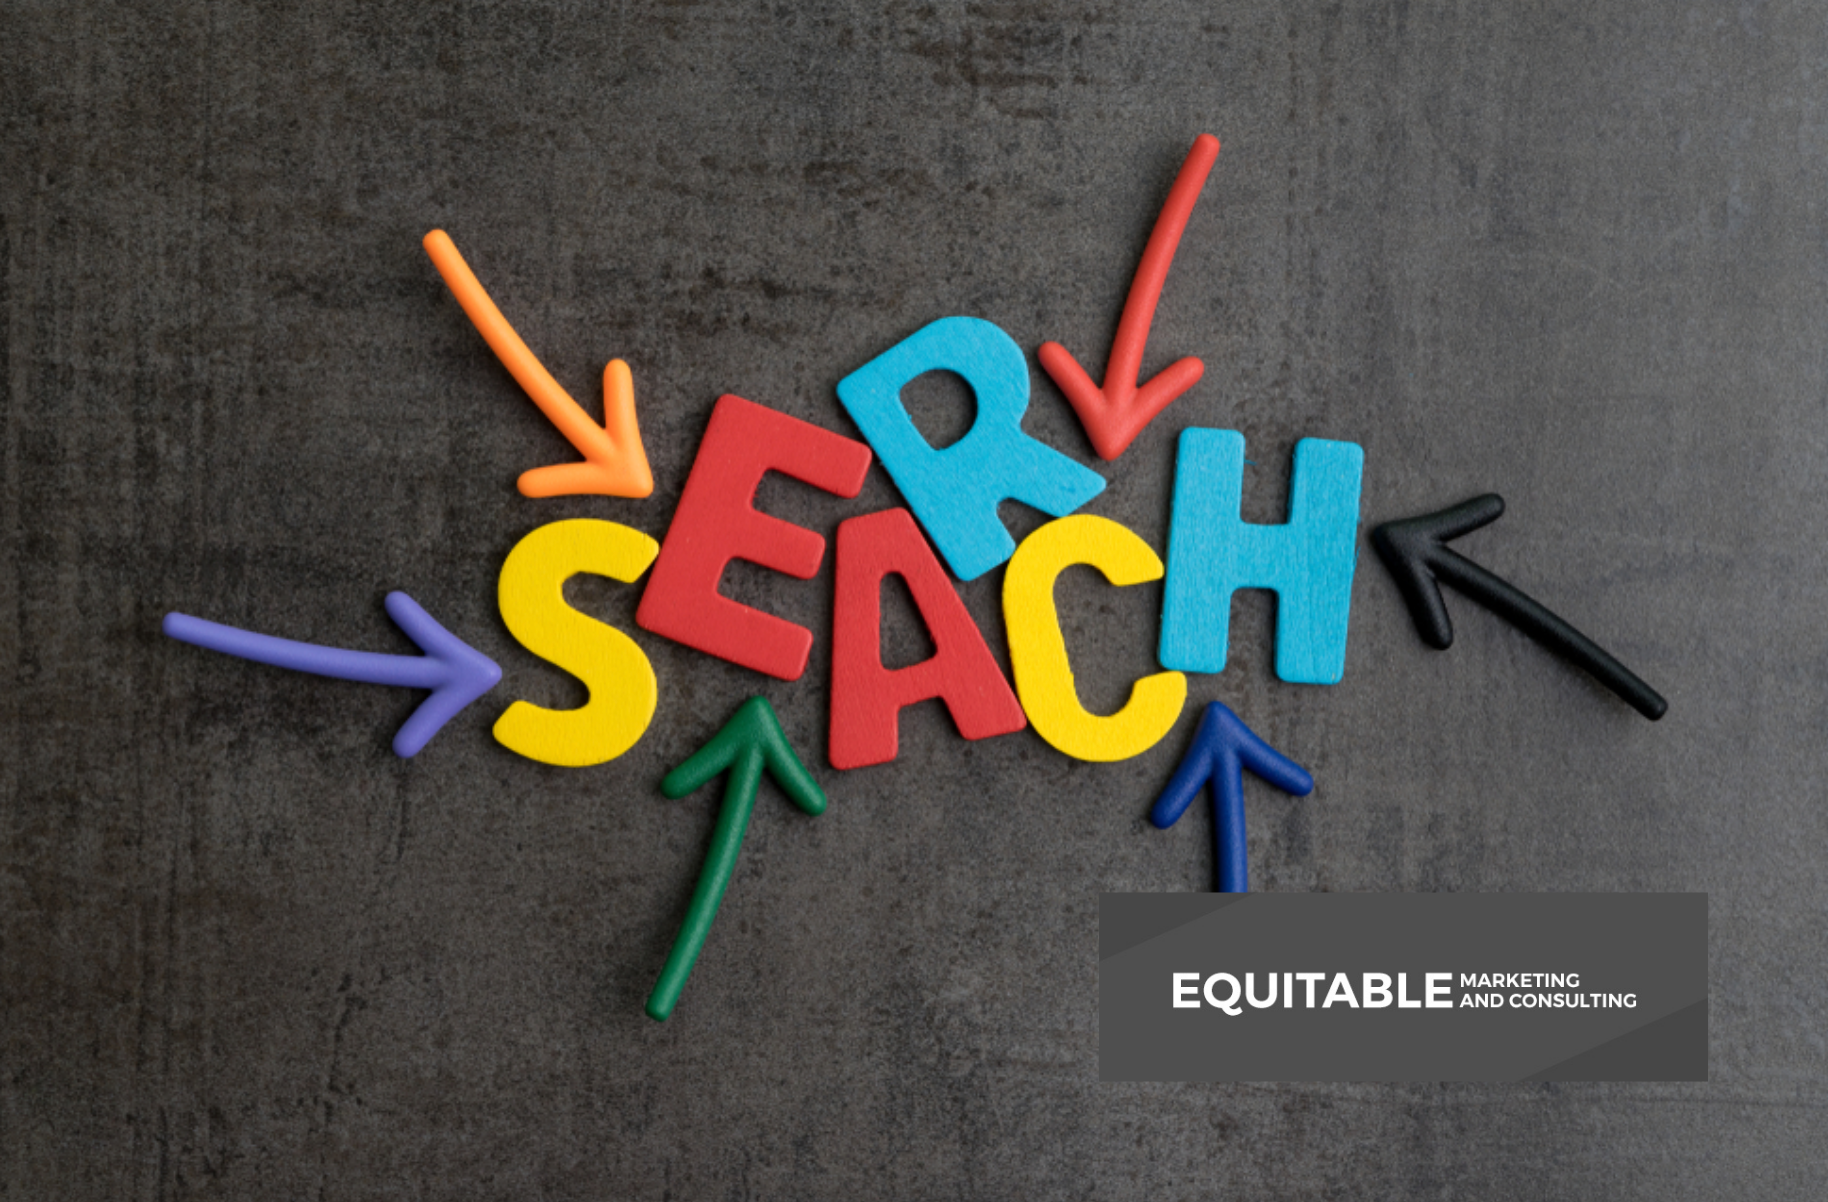 INSIDER TRICKS EQUITABLE MARKETING USES TO GET THE BEST SEARCH ENGINE RESULTS FOR CLIENTS